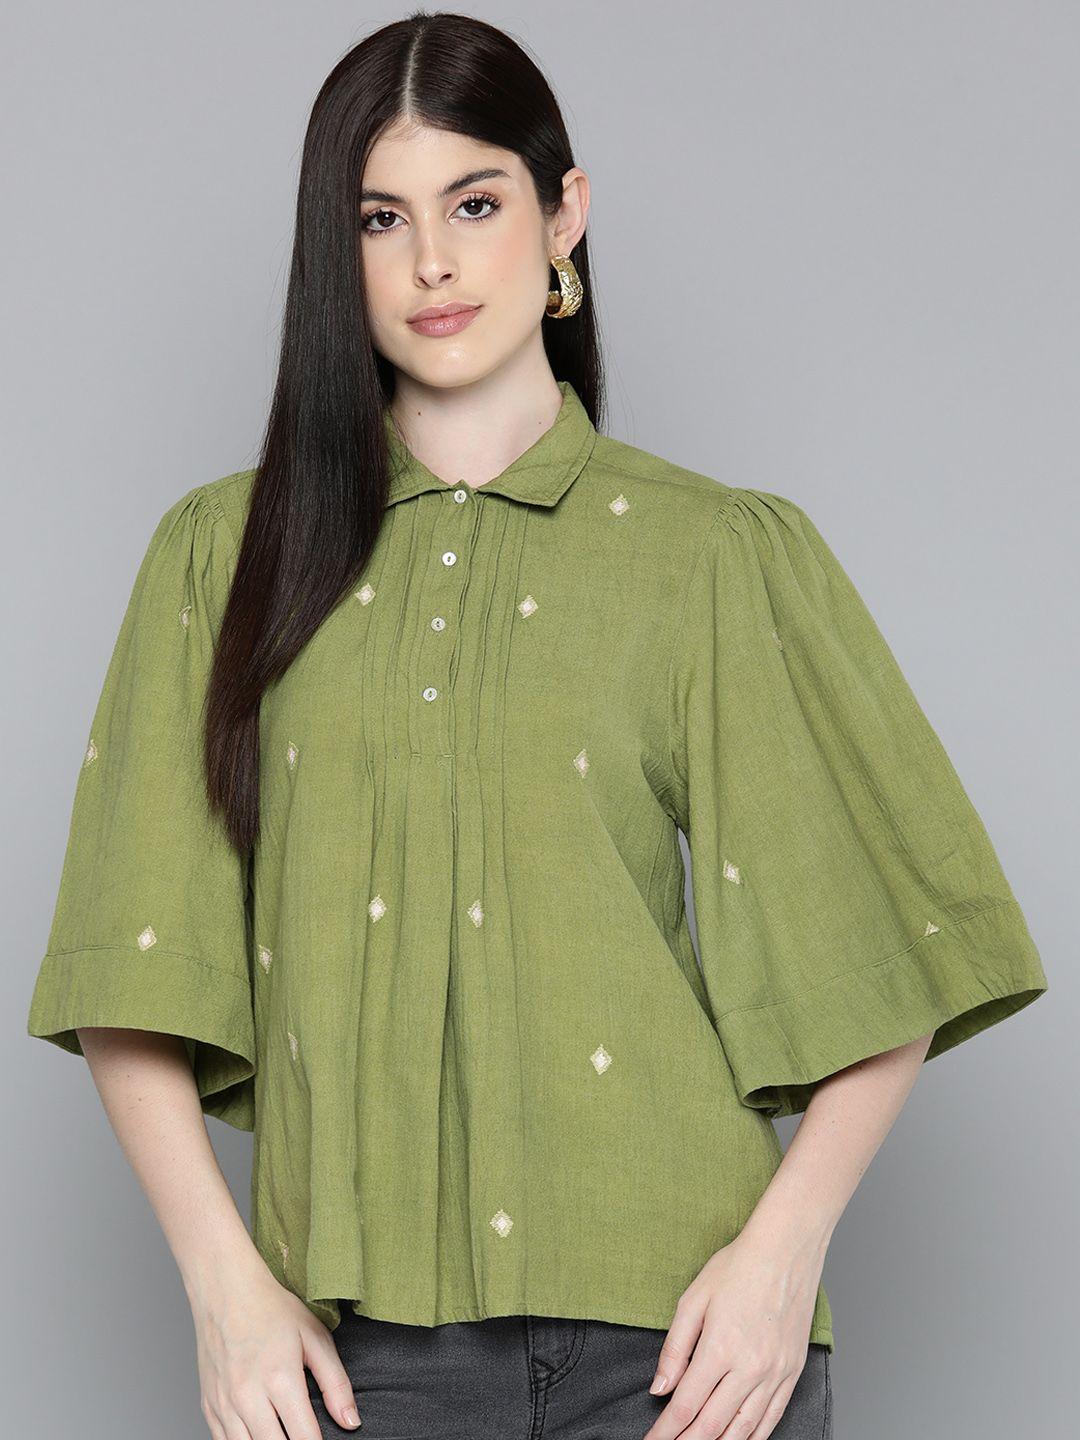 scoup geometric embroidered flared sleeve cotton shirt style top